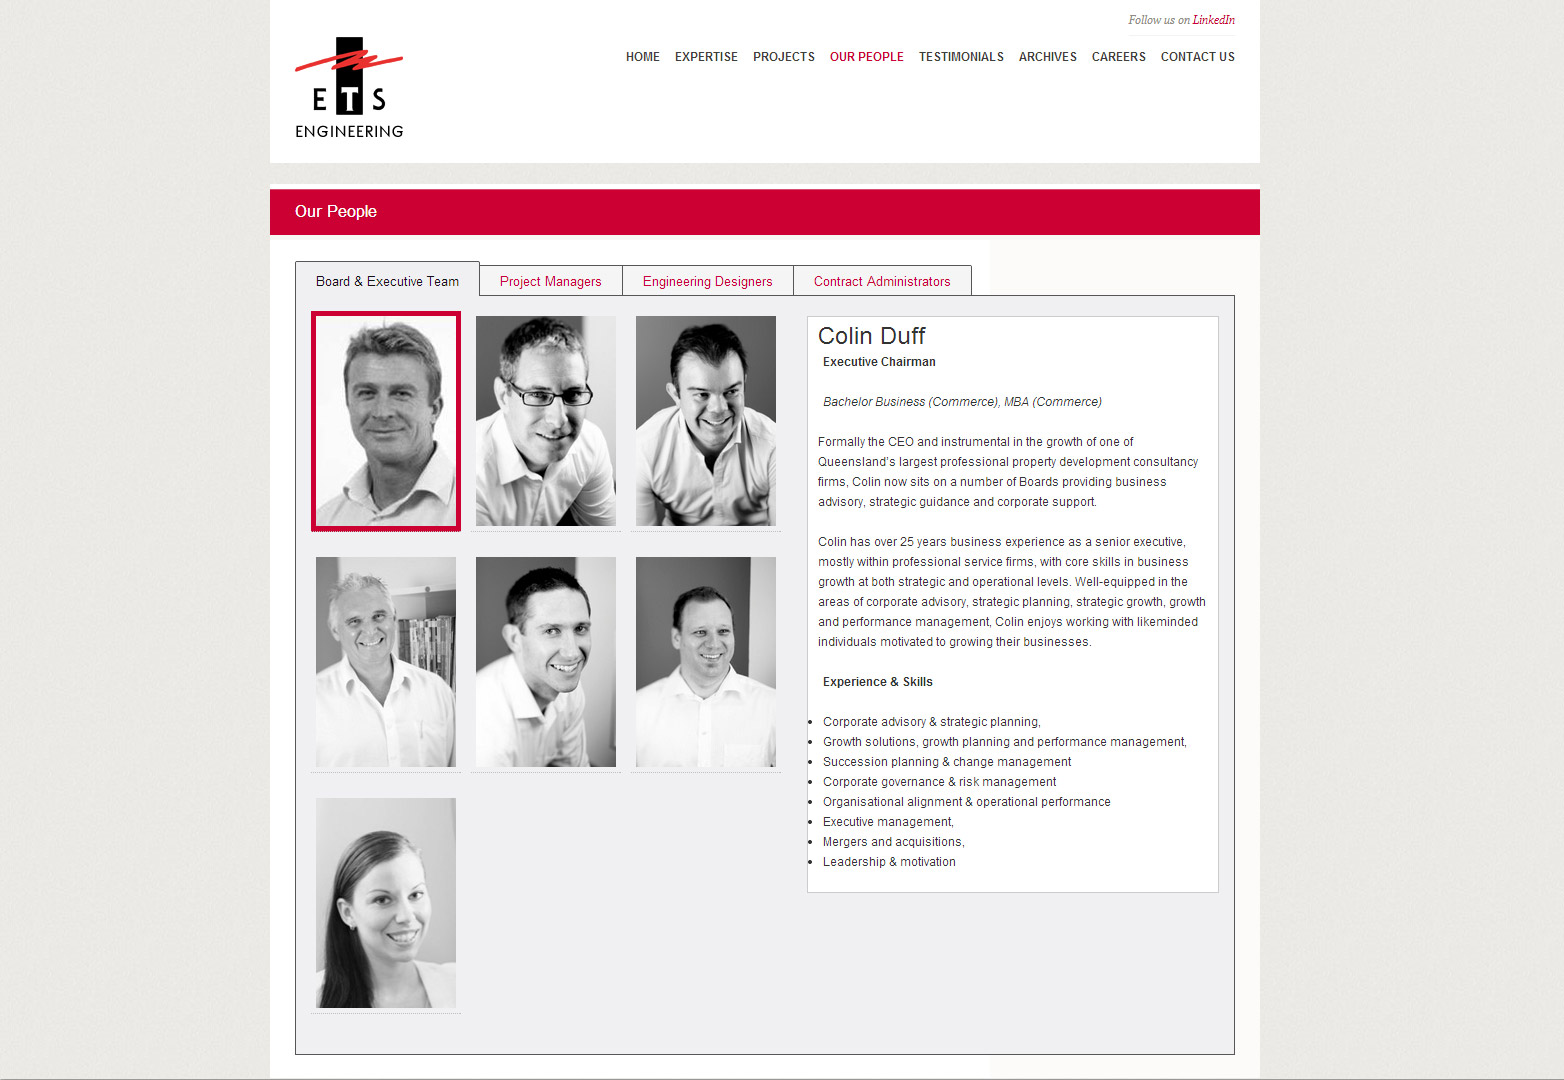 ETS Engineering Our People webpage